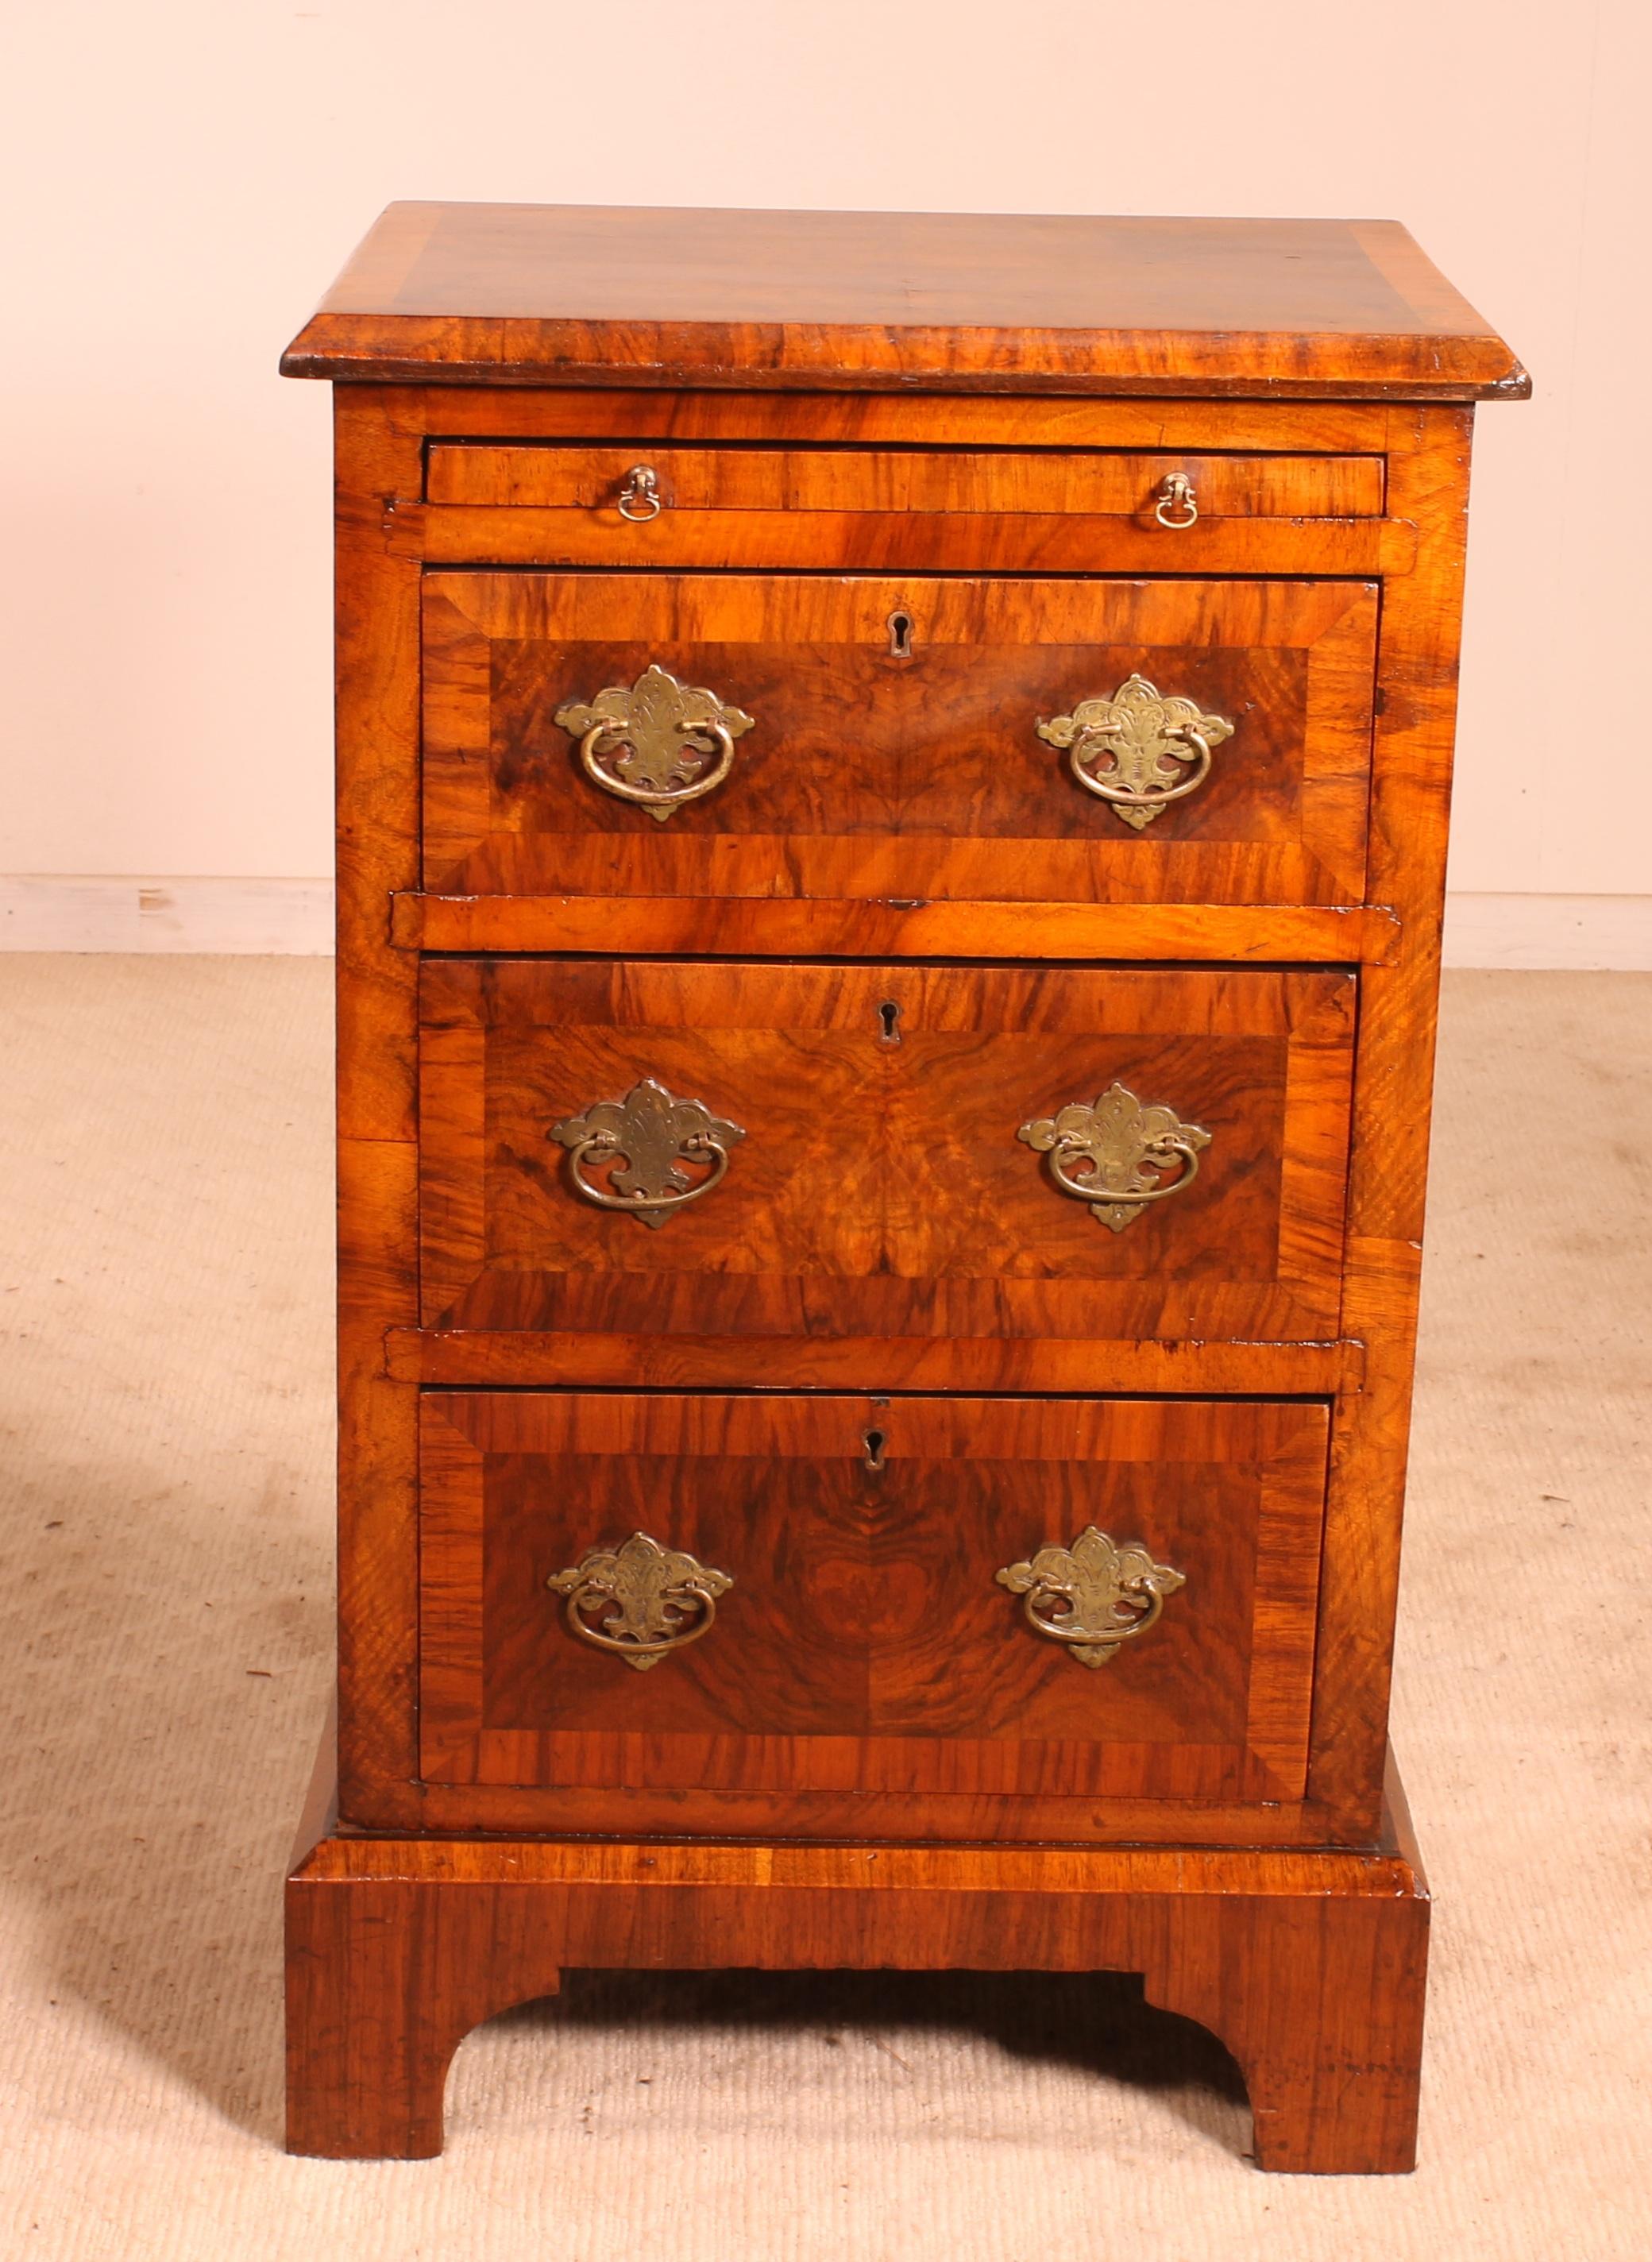 lovely bedside table or English mini chest from the 19th century in blur walnut
The chest of drawers stands out by its beautiful quality, its period and its original dimension.
Indeed the dresser is entirely in burr walnut and has a zipper below